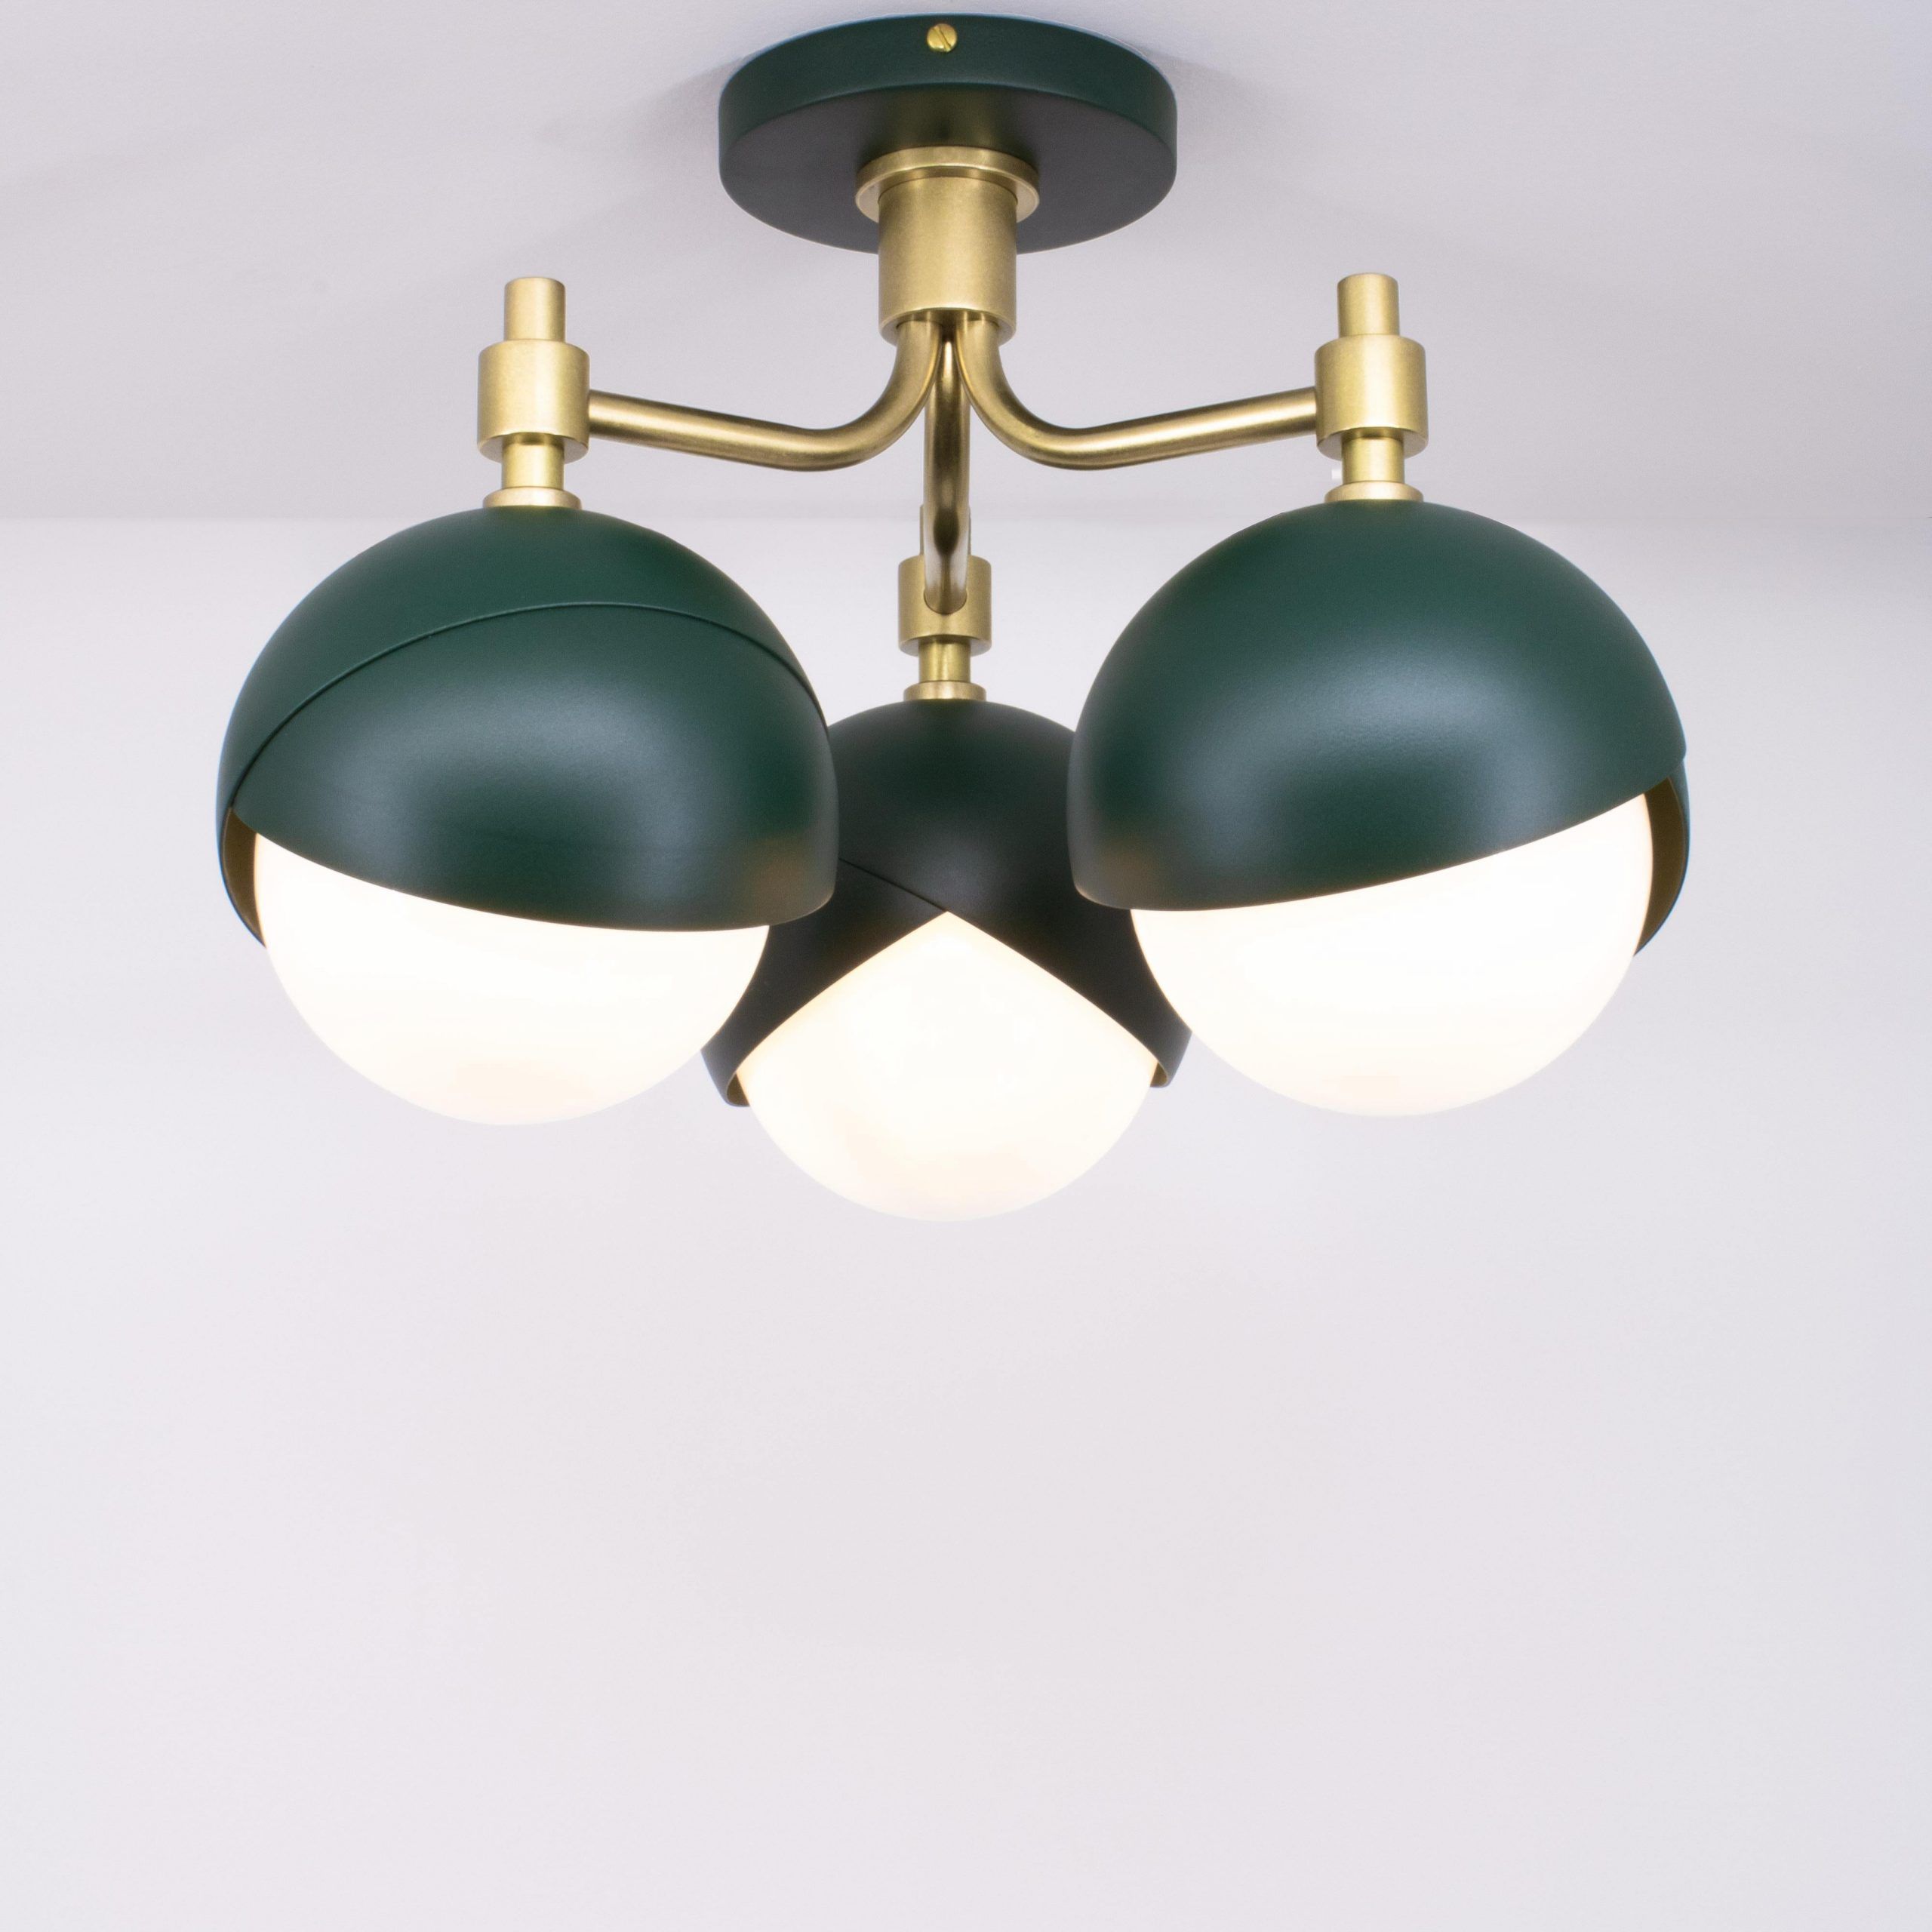 Most Up To Date Benedict Three Light Lantern In Matte Green Powder Coat And Burnished Brass  For Sale At 1stdibs Intended For White Powder Coat Lantern Chandeliers (View 14 of 15)